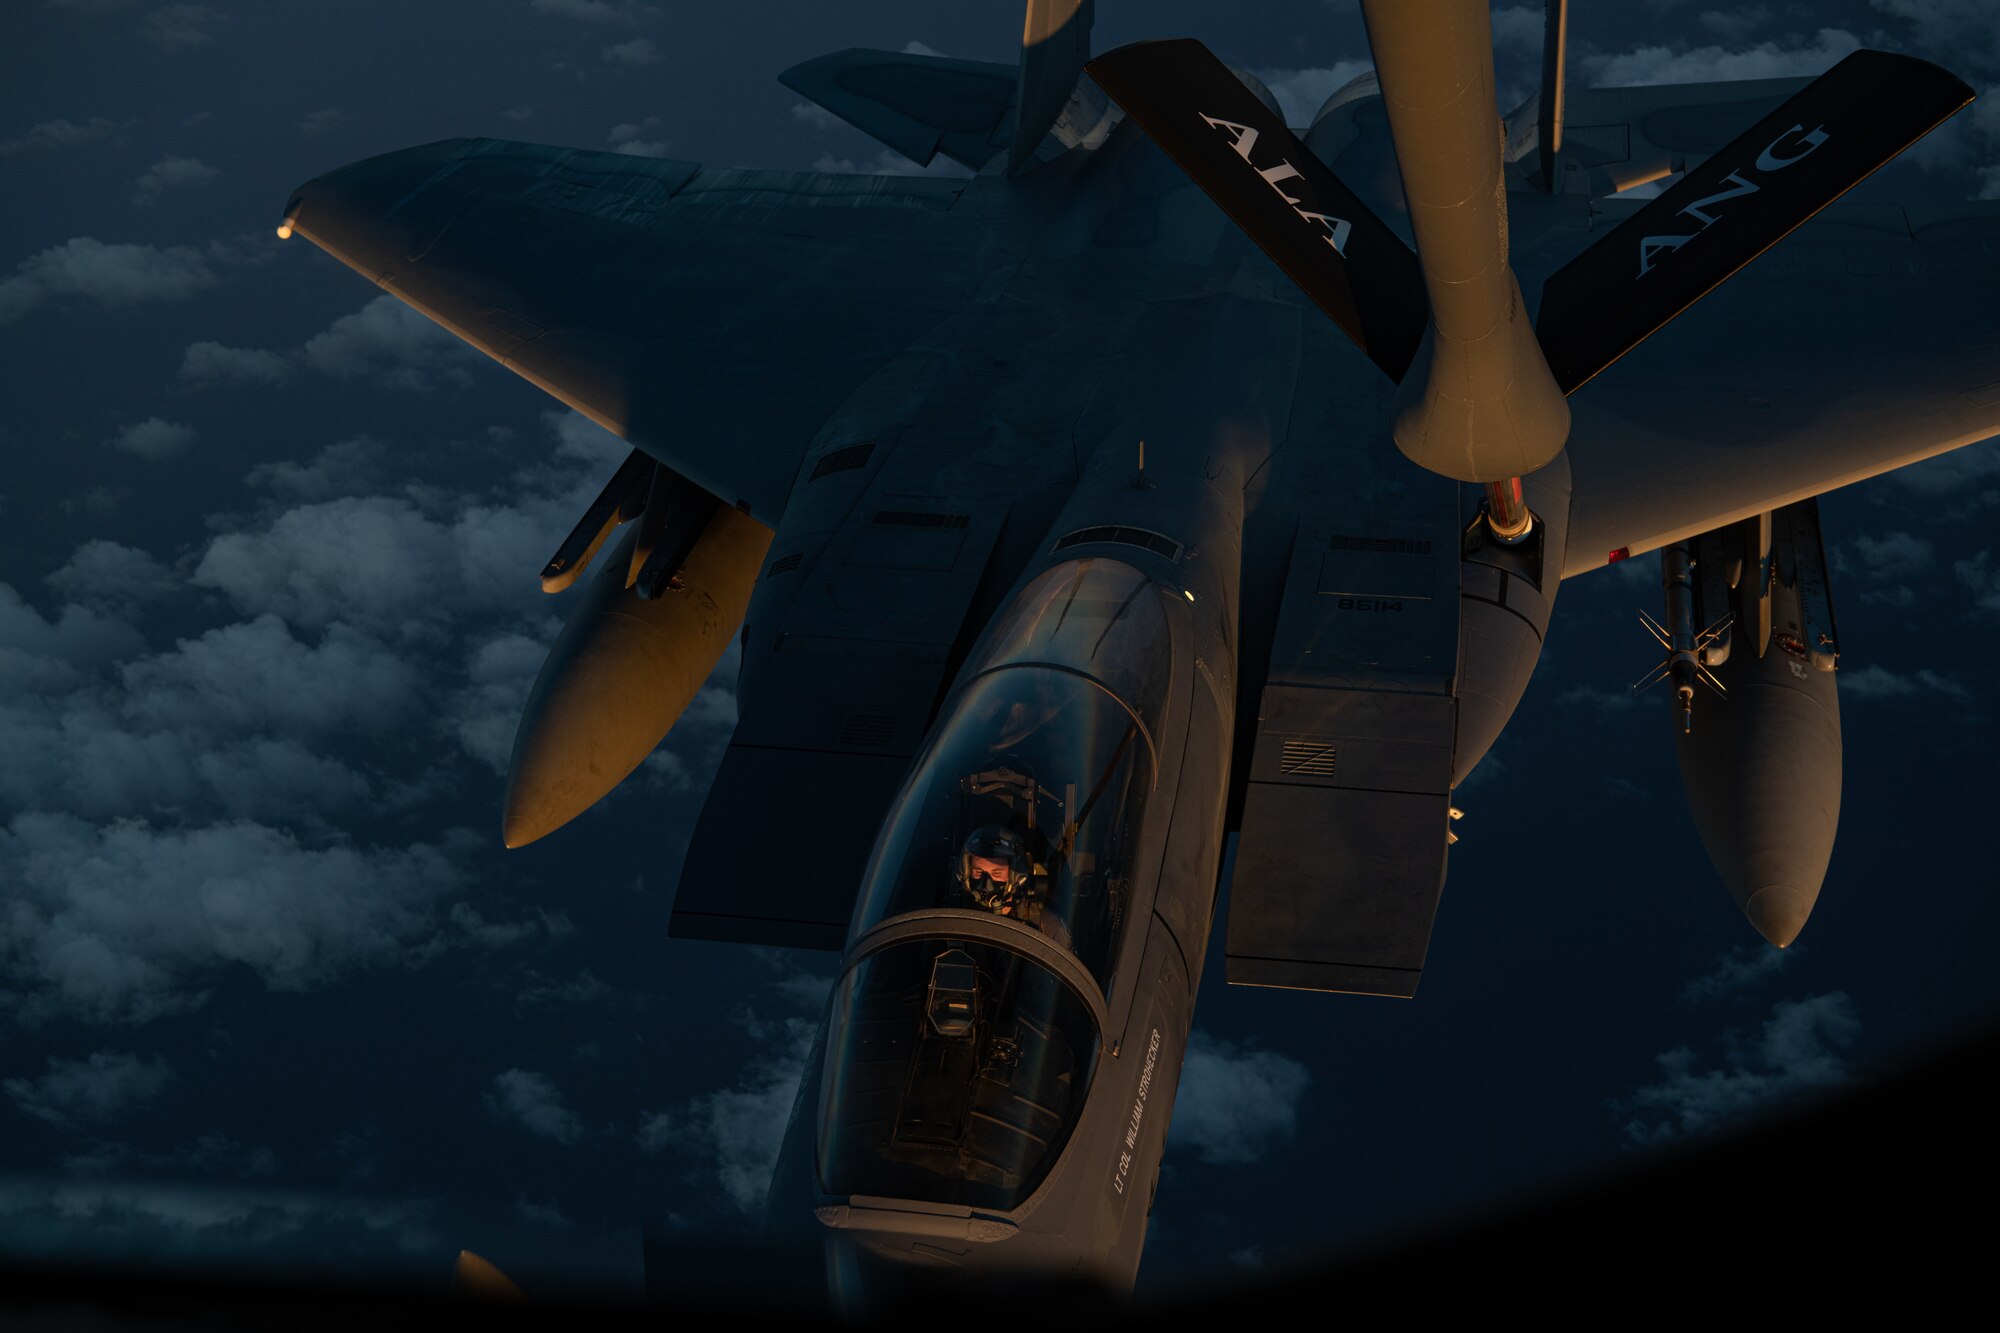 A U.S. Air Force KC-135 Stratotanker from the 909th Air Refueling Squadron refuels a U.S. Air Force F-15C Eagle during Exercise Southern Beach over the Pacific Ocean, Oct. 28, 2021. Bilateral training exercises like Southern Beach help build trusting relationships among foreign and domestic forces, ensuring allies are able to come together to effectively respond to demanding scenarios and execute high-end missions in defense of a free and open Indo-Pacific region. (U.S. Air Force photo by Staff Sgt. Savannah L. Waters)